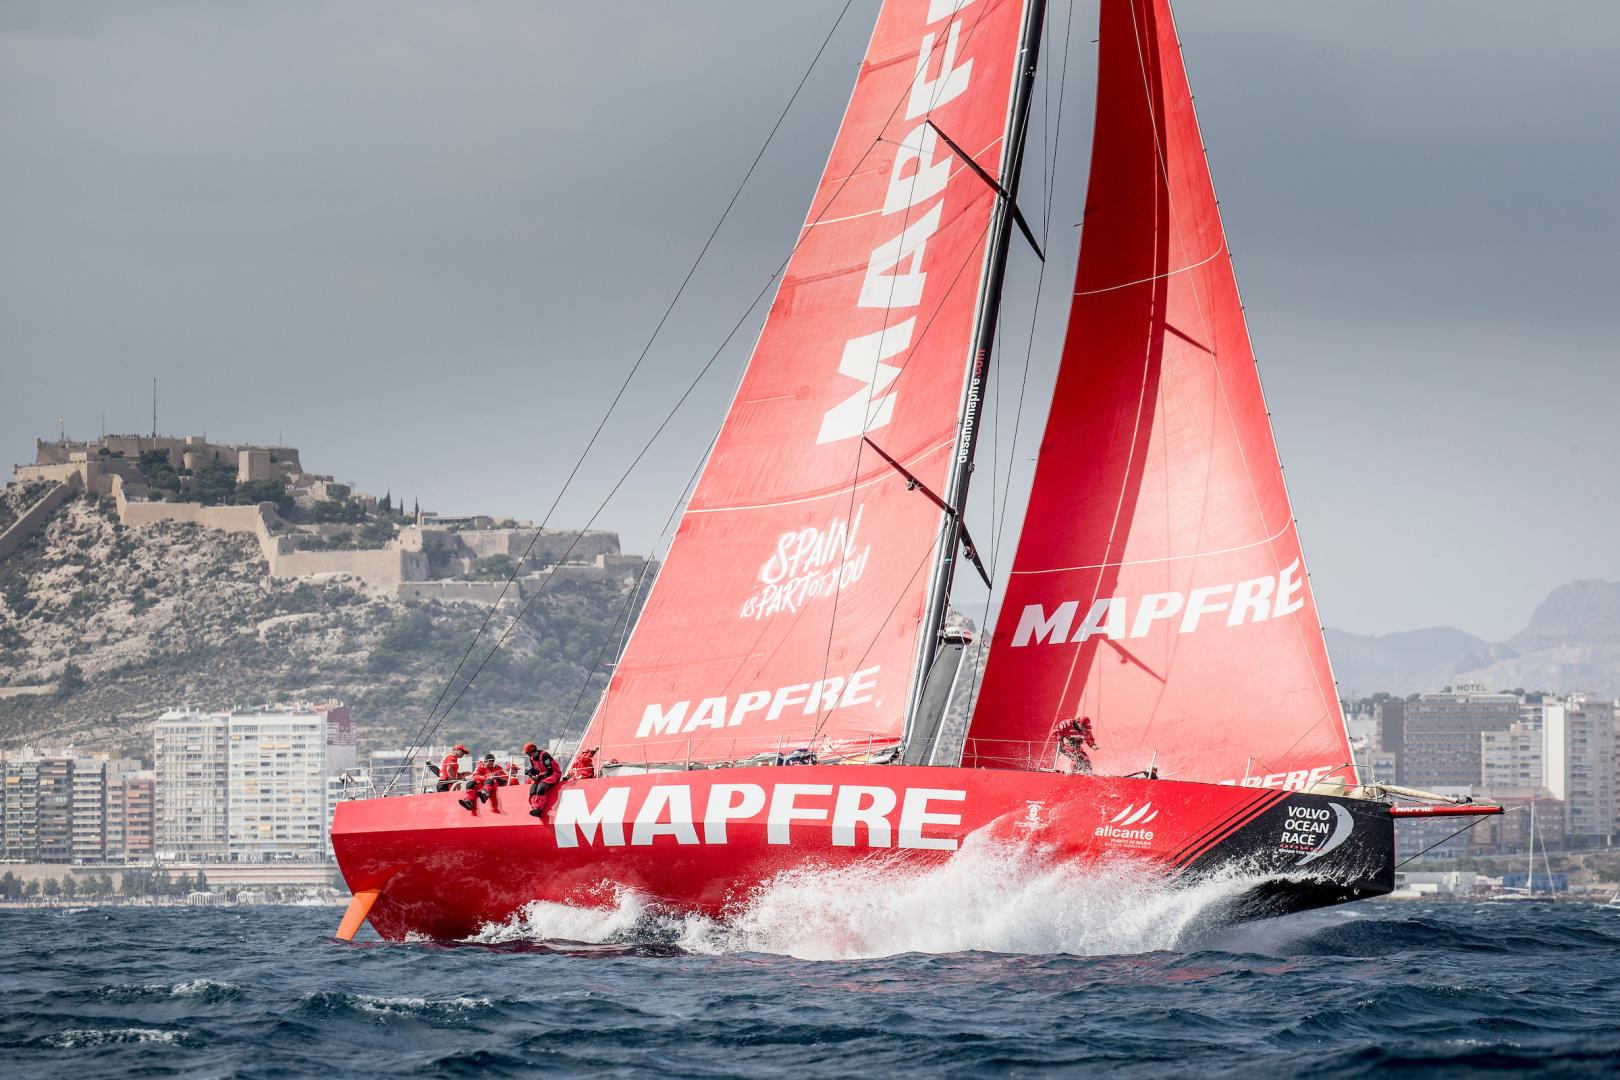 MAPFRE, the action begins at the Volvo Ocean Race in Alicante